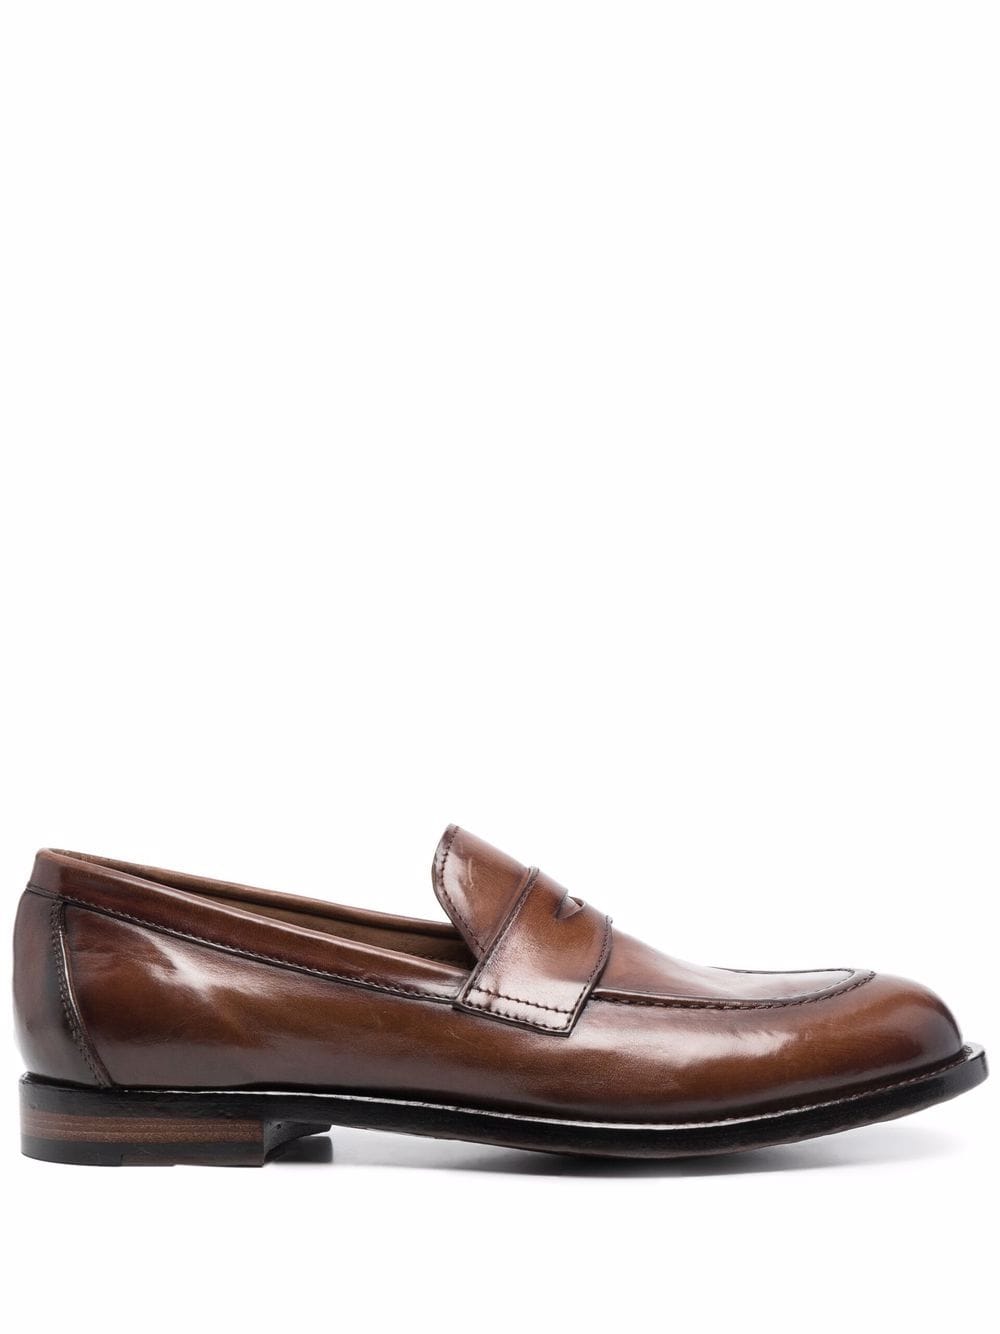 round-toe leather loafers